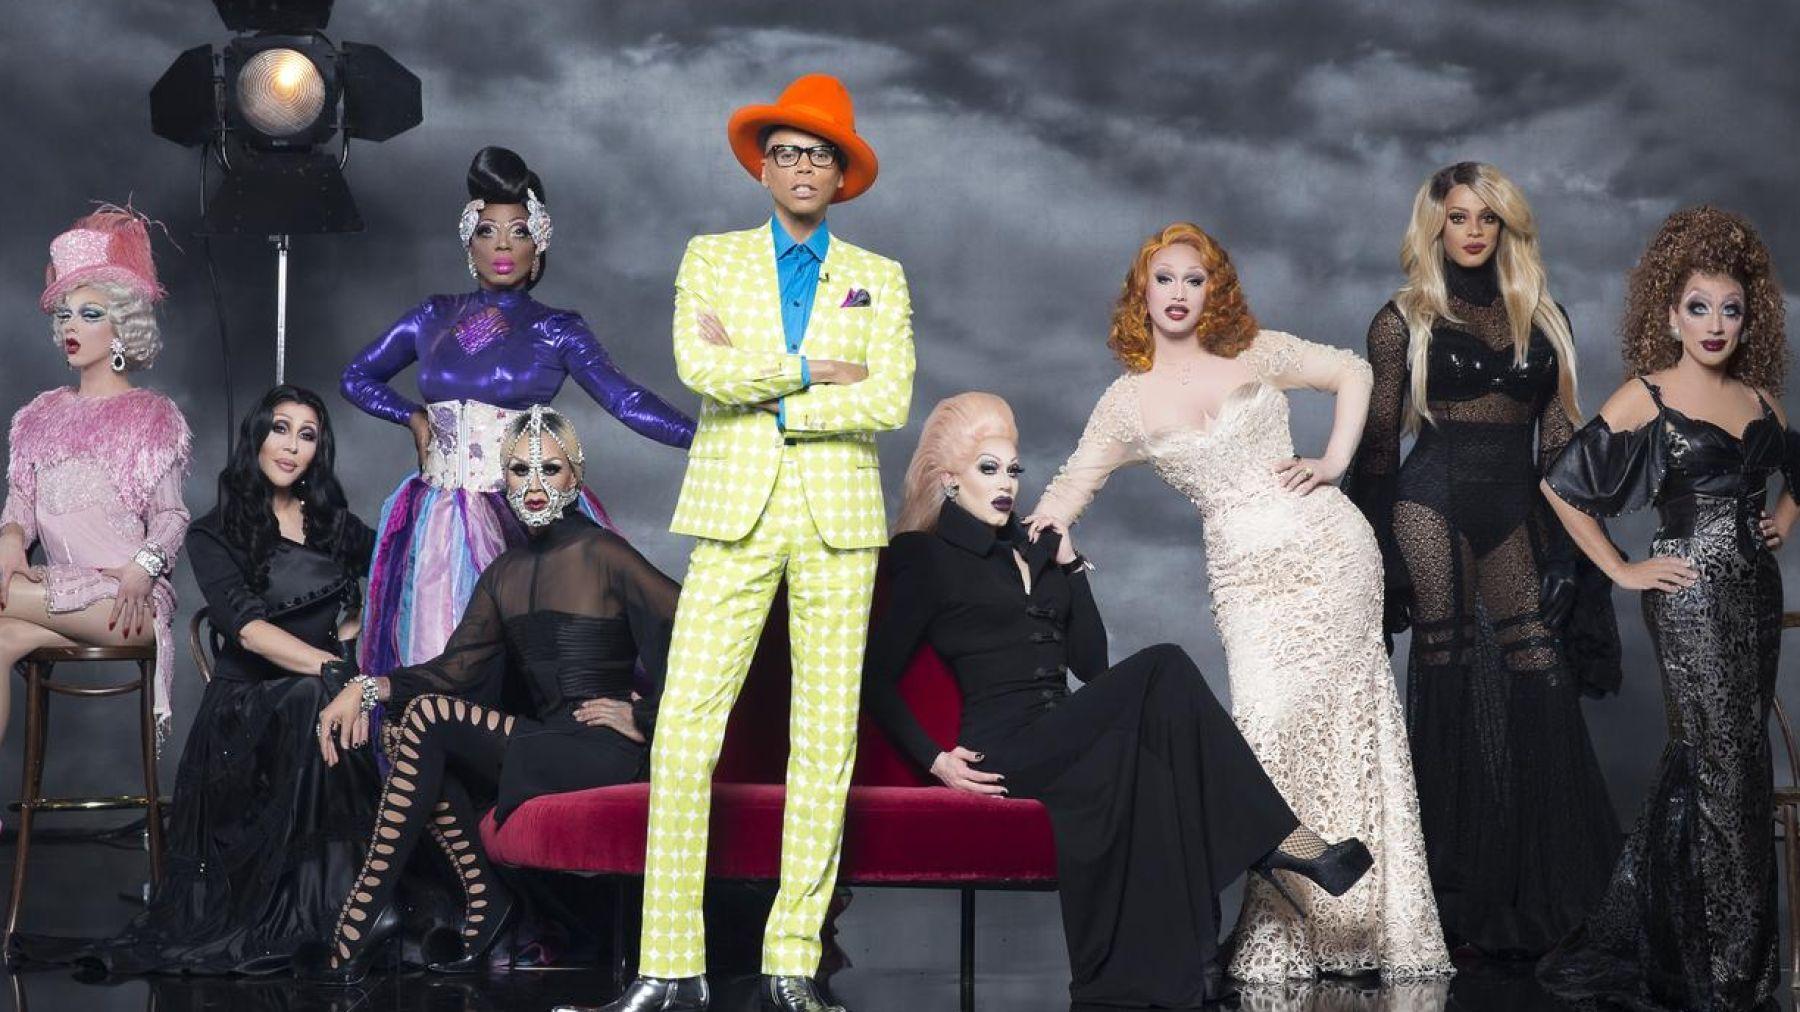 RuPaul Reunites With All The “Drag Race” Winners!